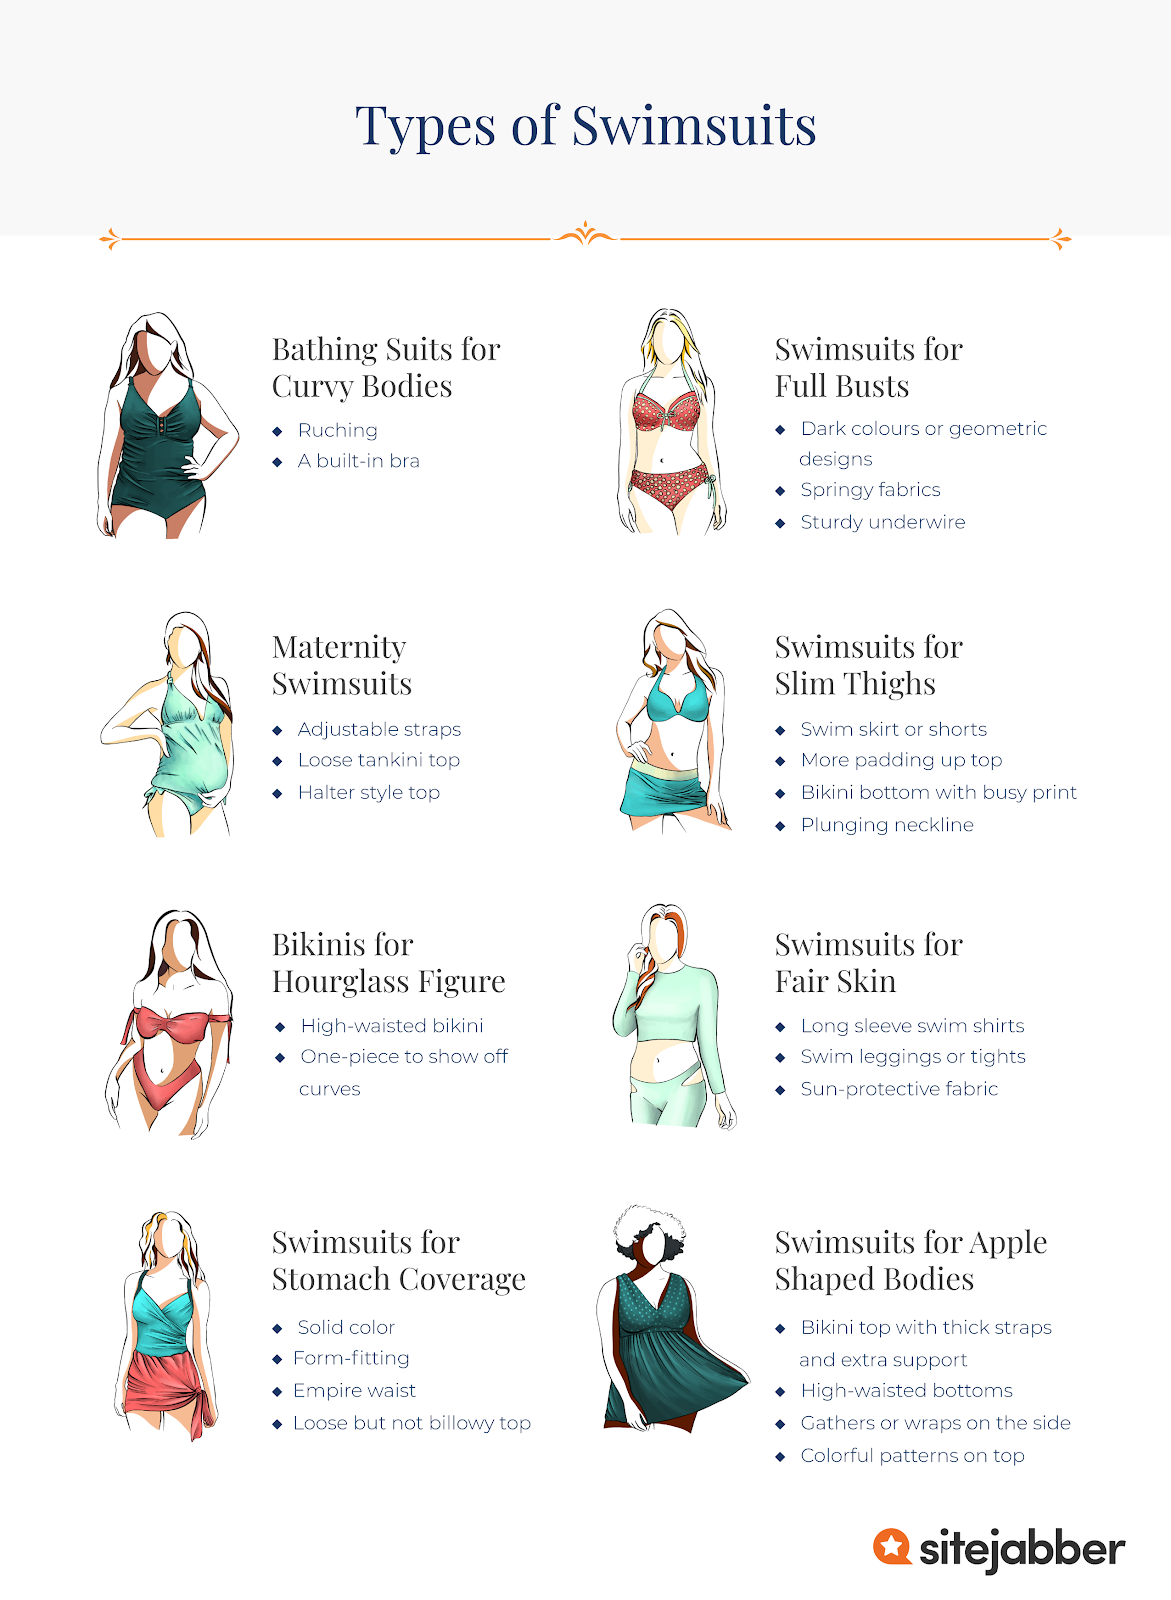 Types of Fabric Used for Swimsuits